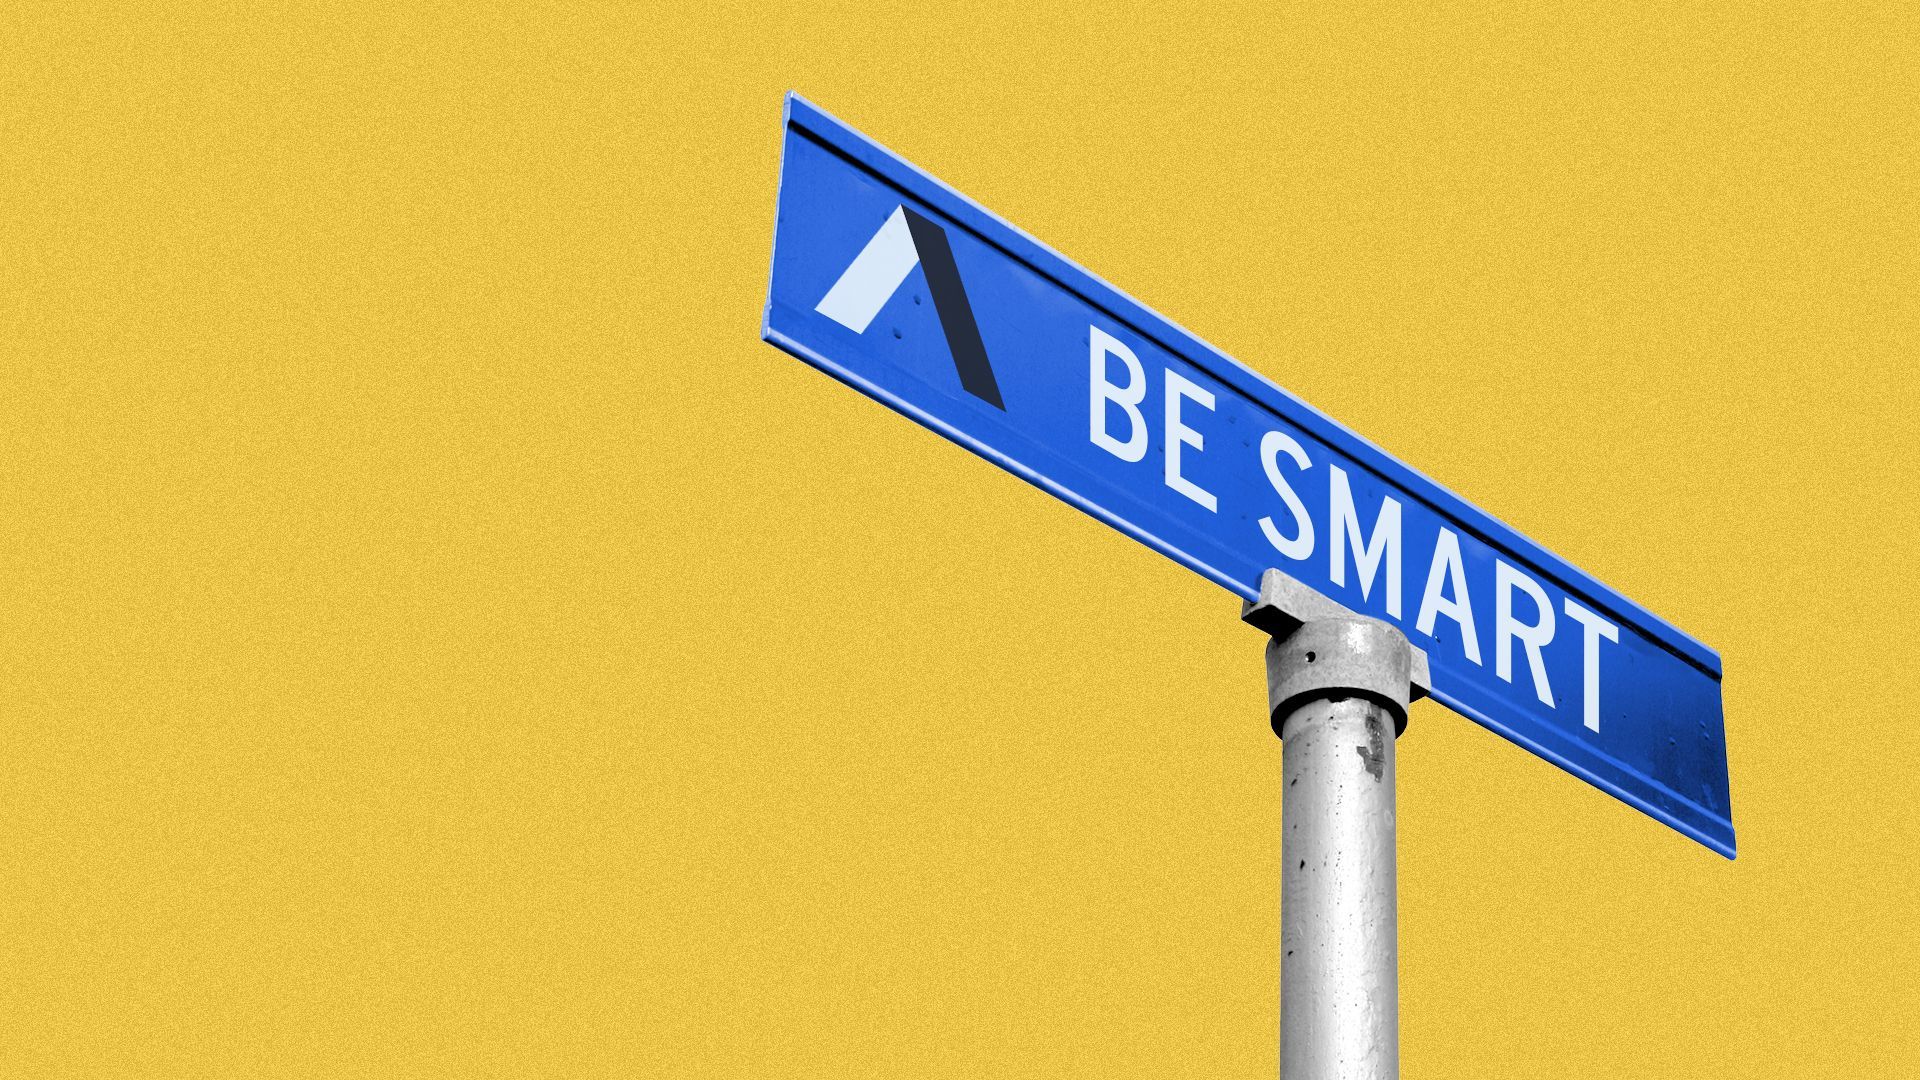 Illustration of a blue street sign that says Be Smart, featuring an Axios logo.